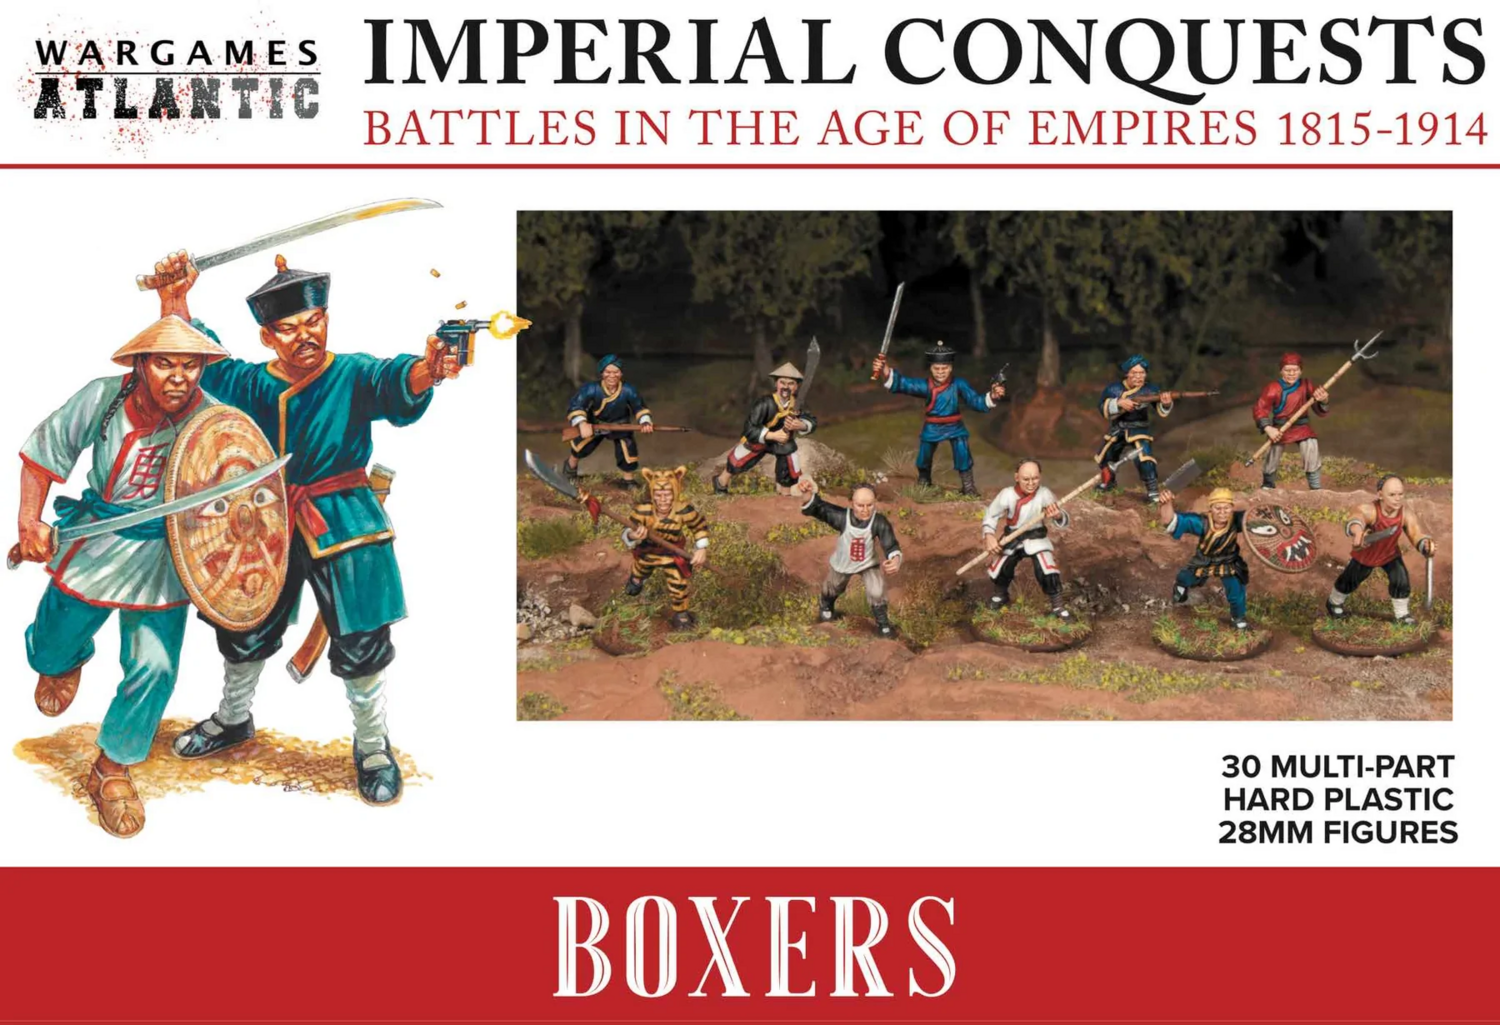 Imperial Conquests: Boxers